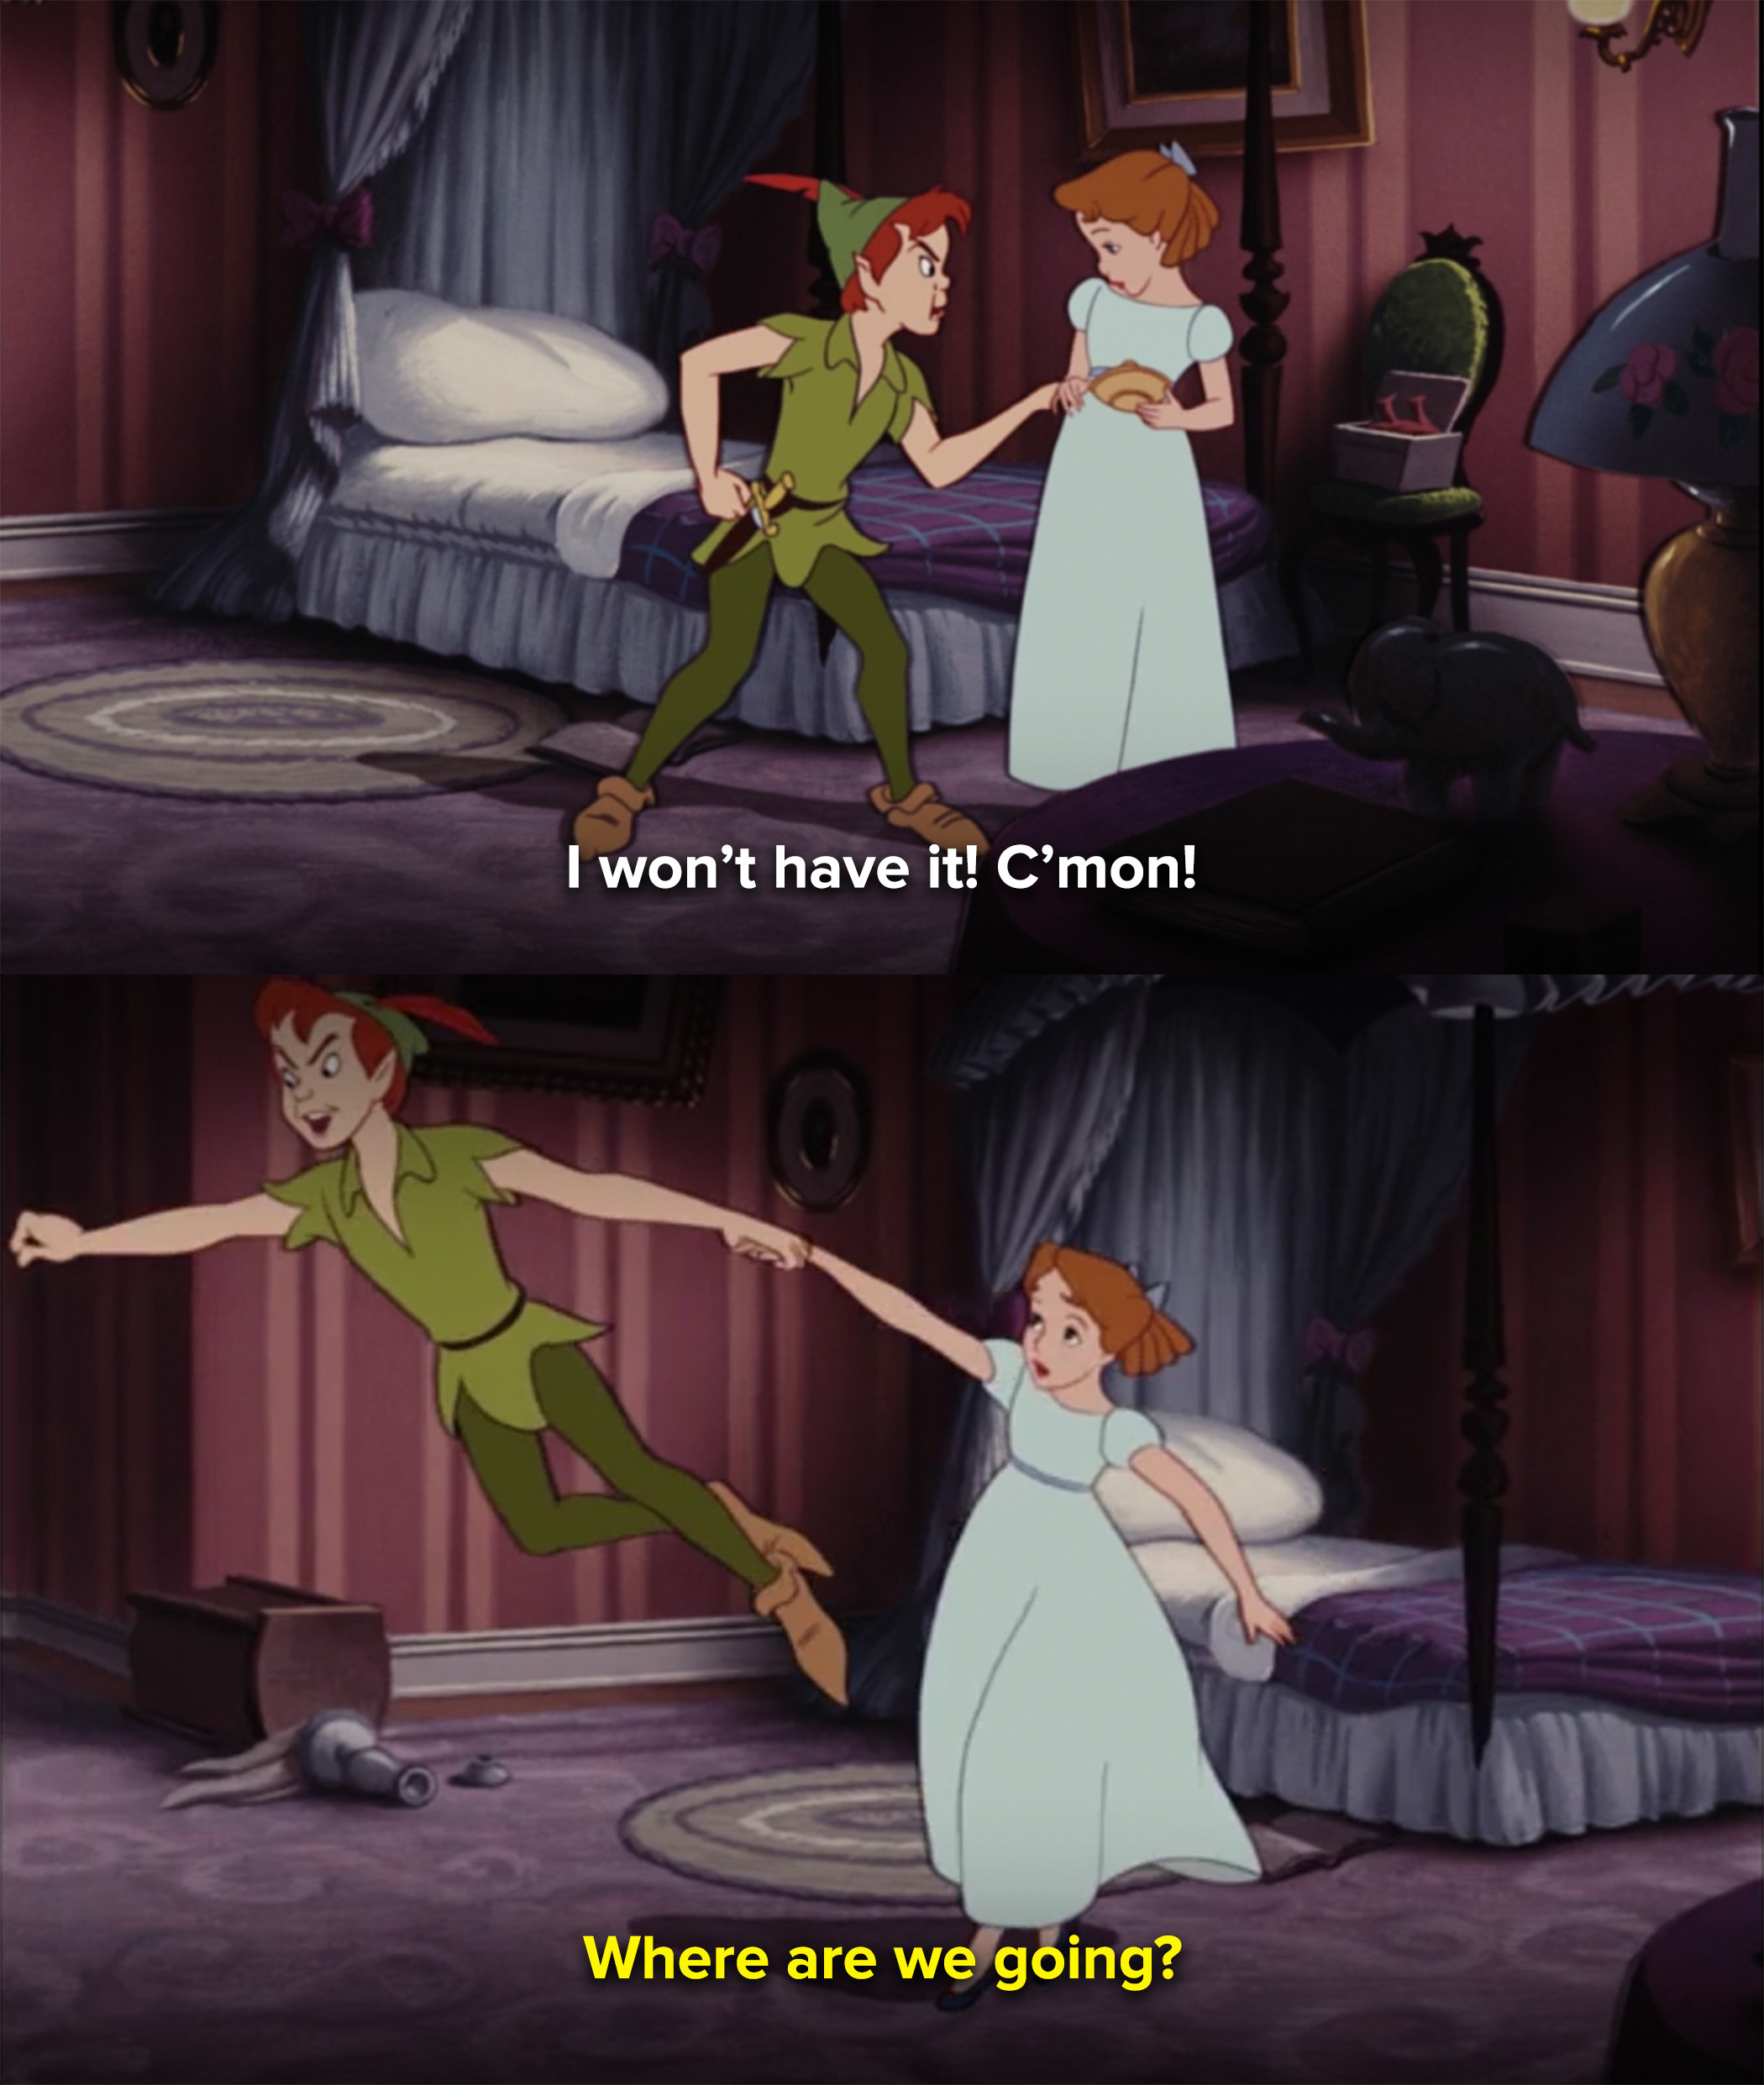 Peter Pan drags Wendy off to Neverland without asking